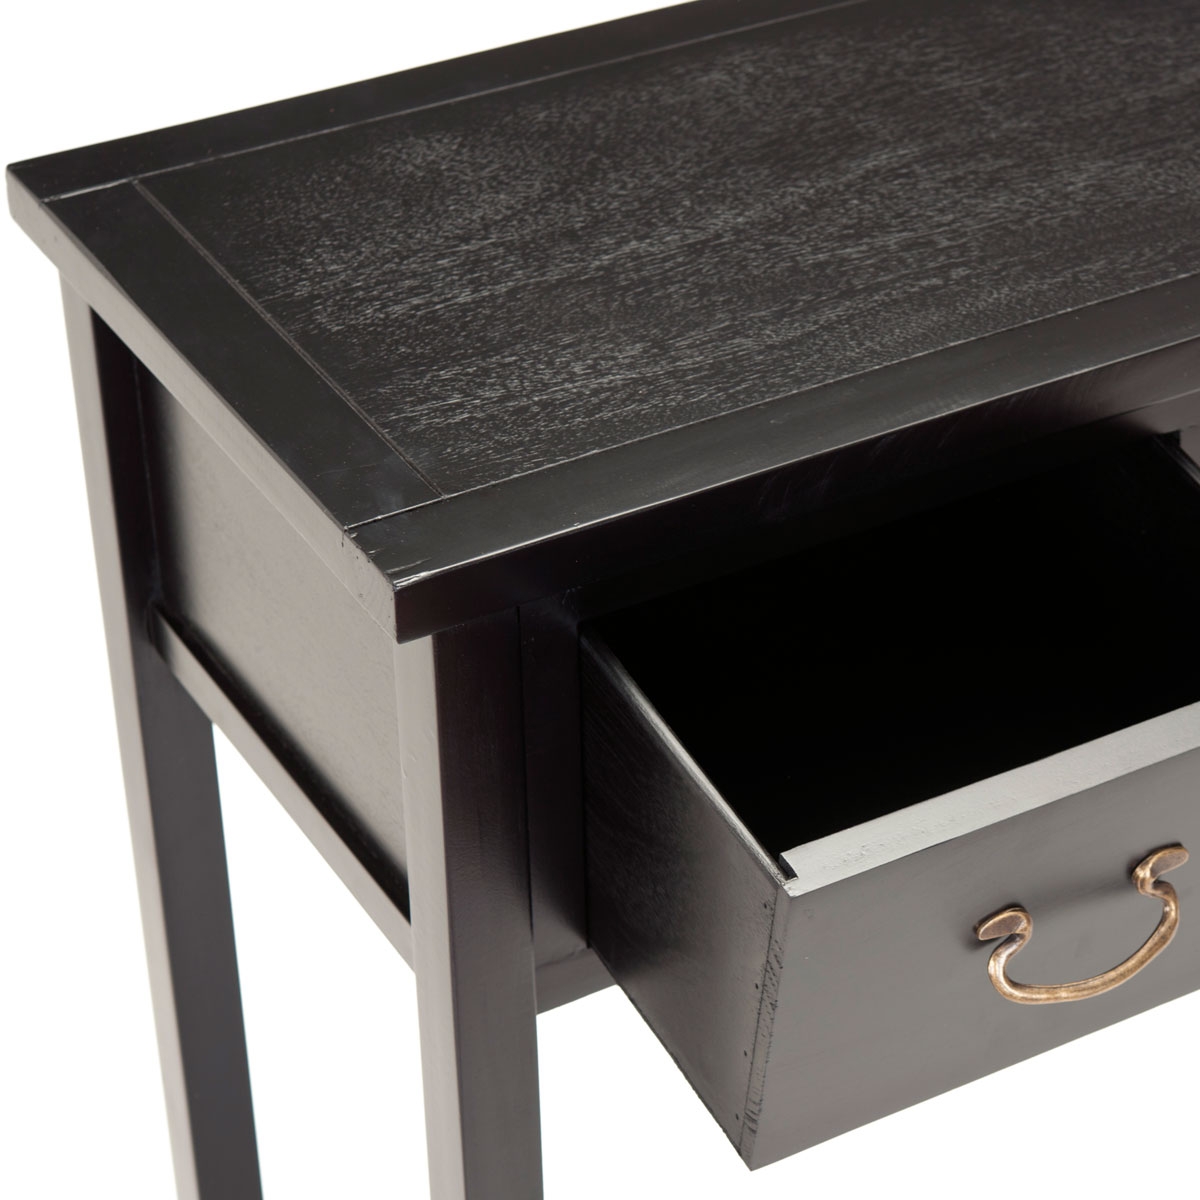 Cindy Console With Storage Drawers - Black - Safavieh - Image 2